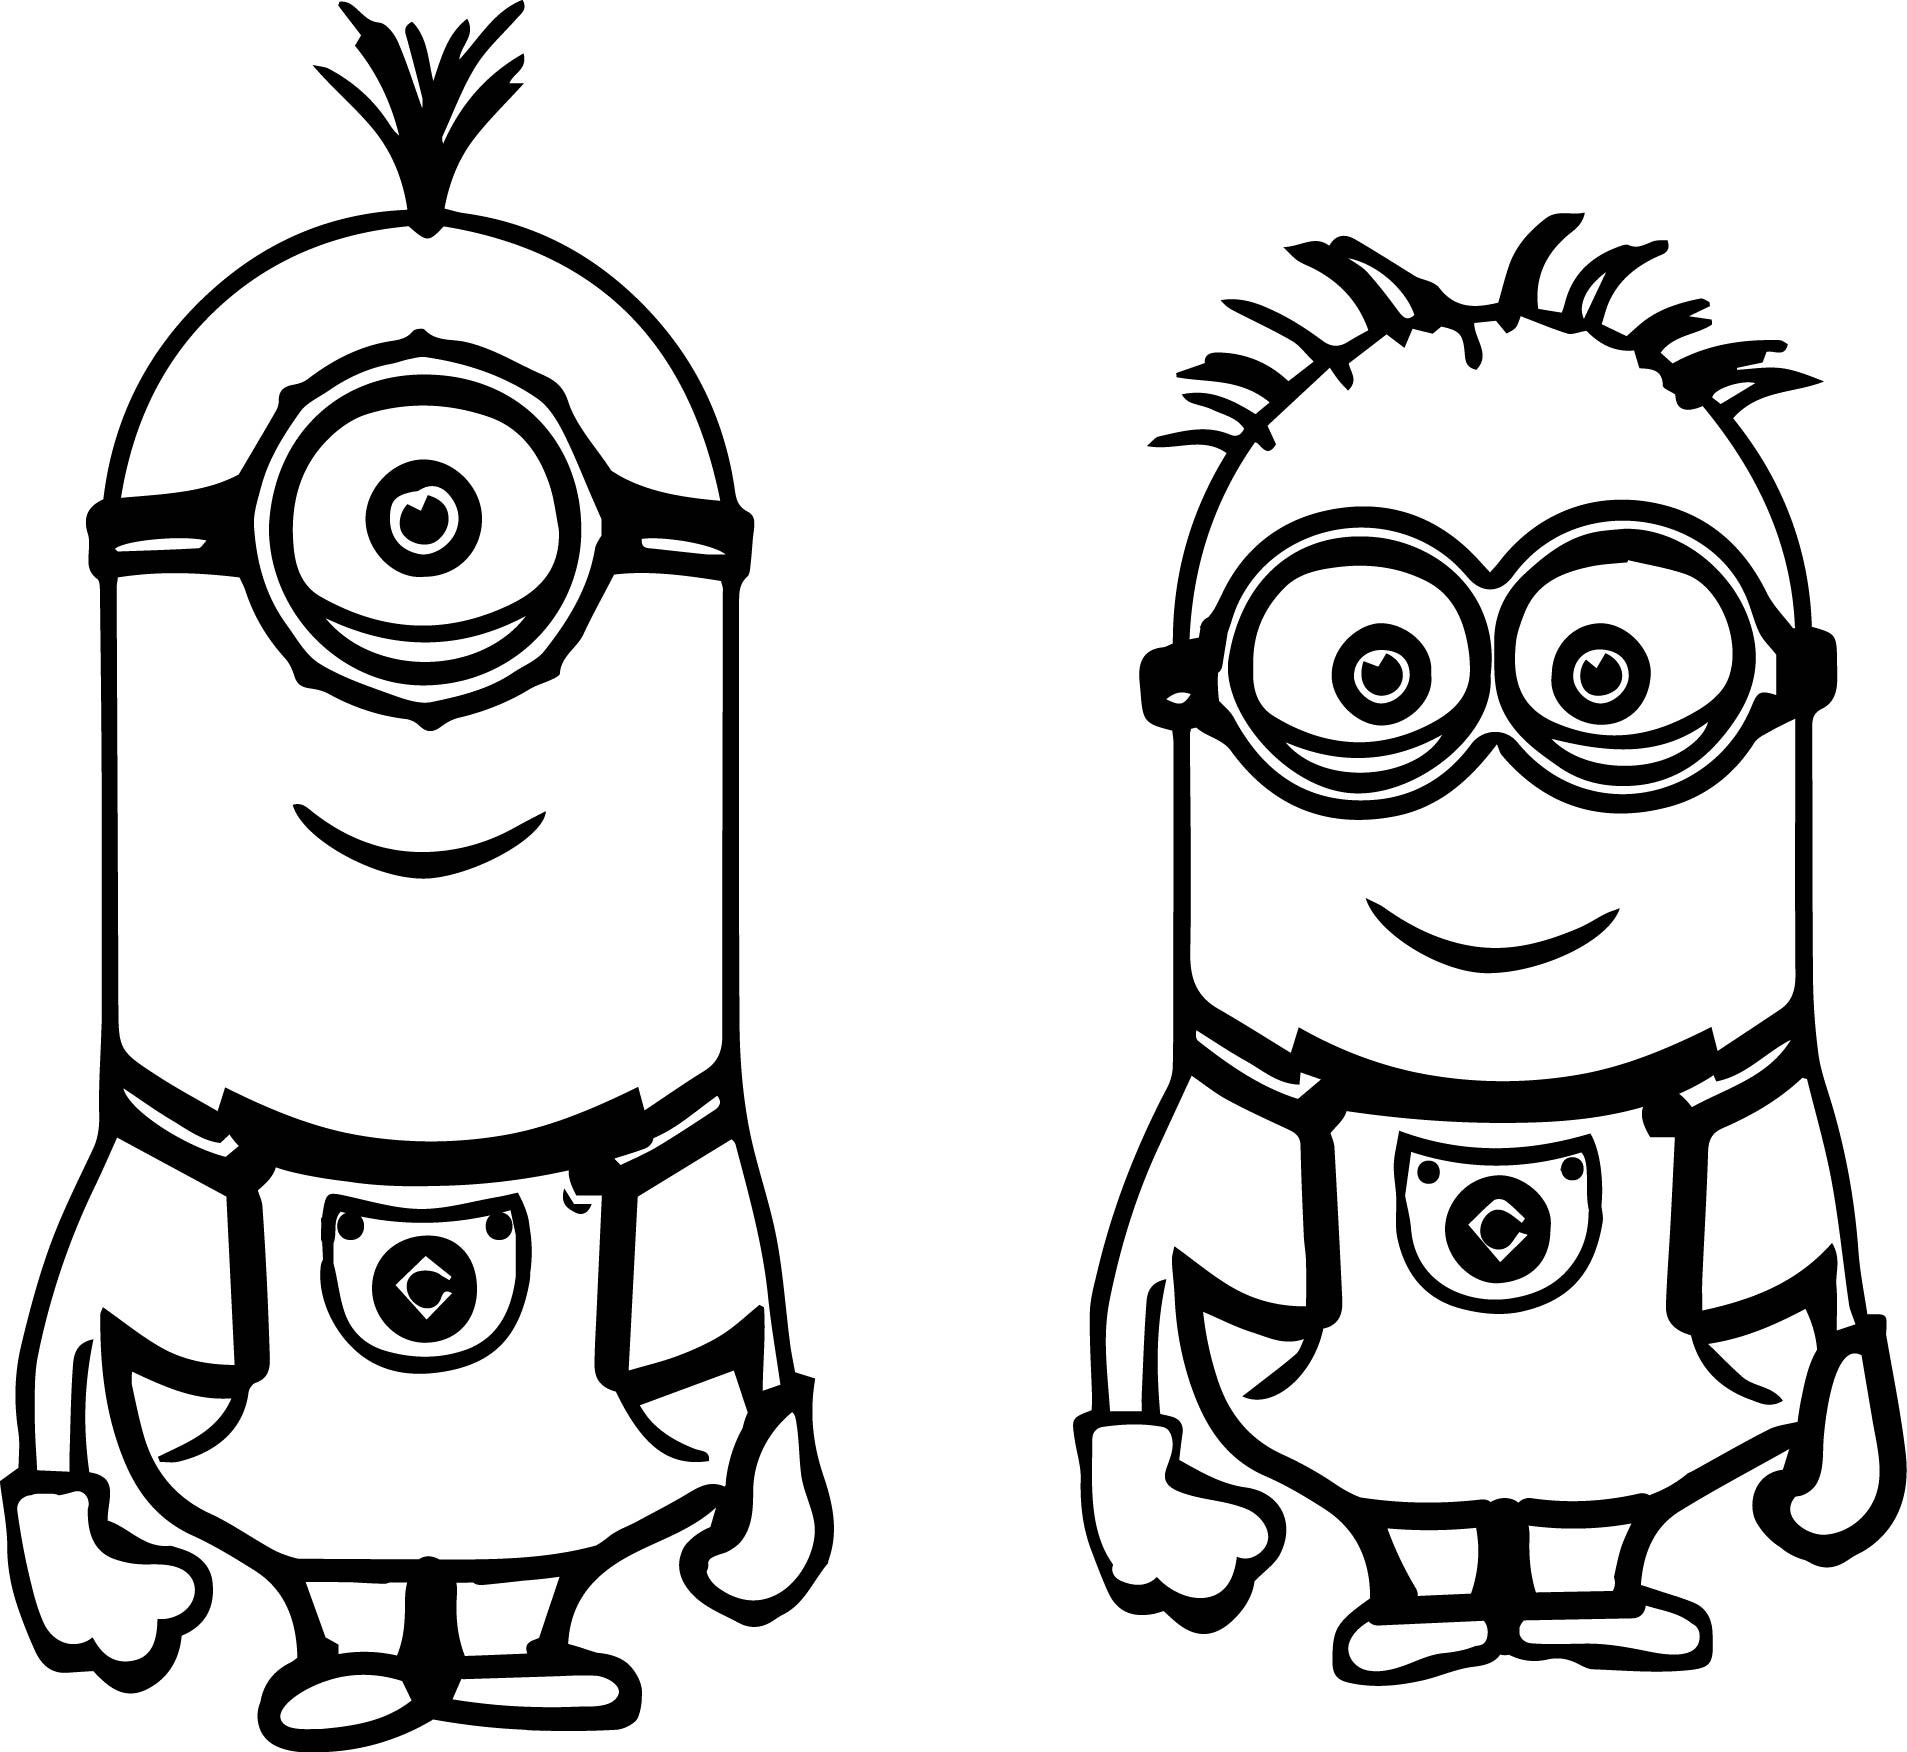 Minion outline drawing.